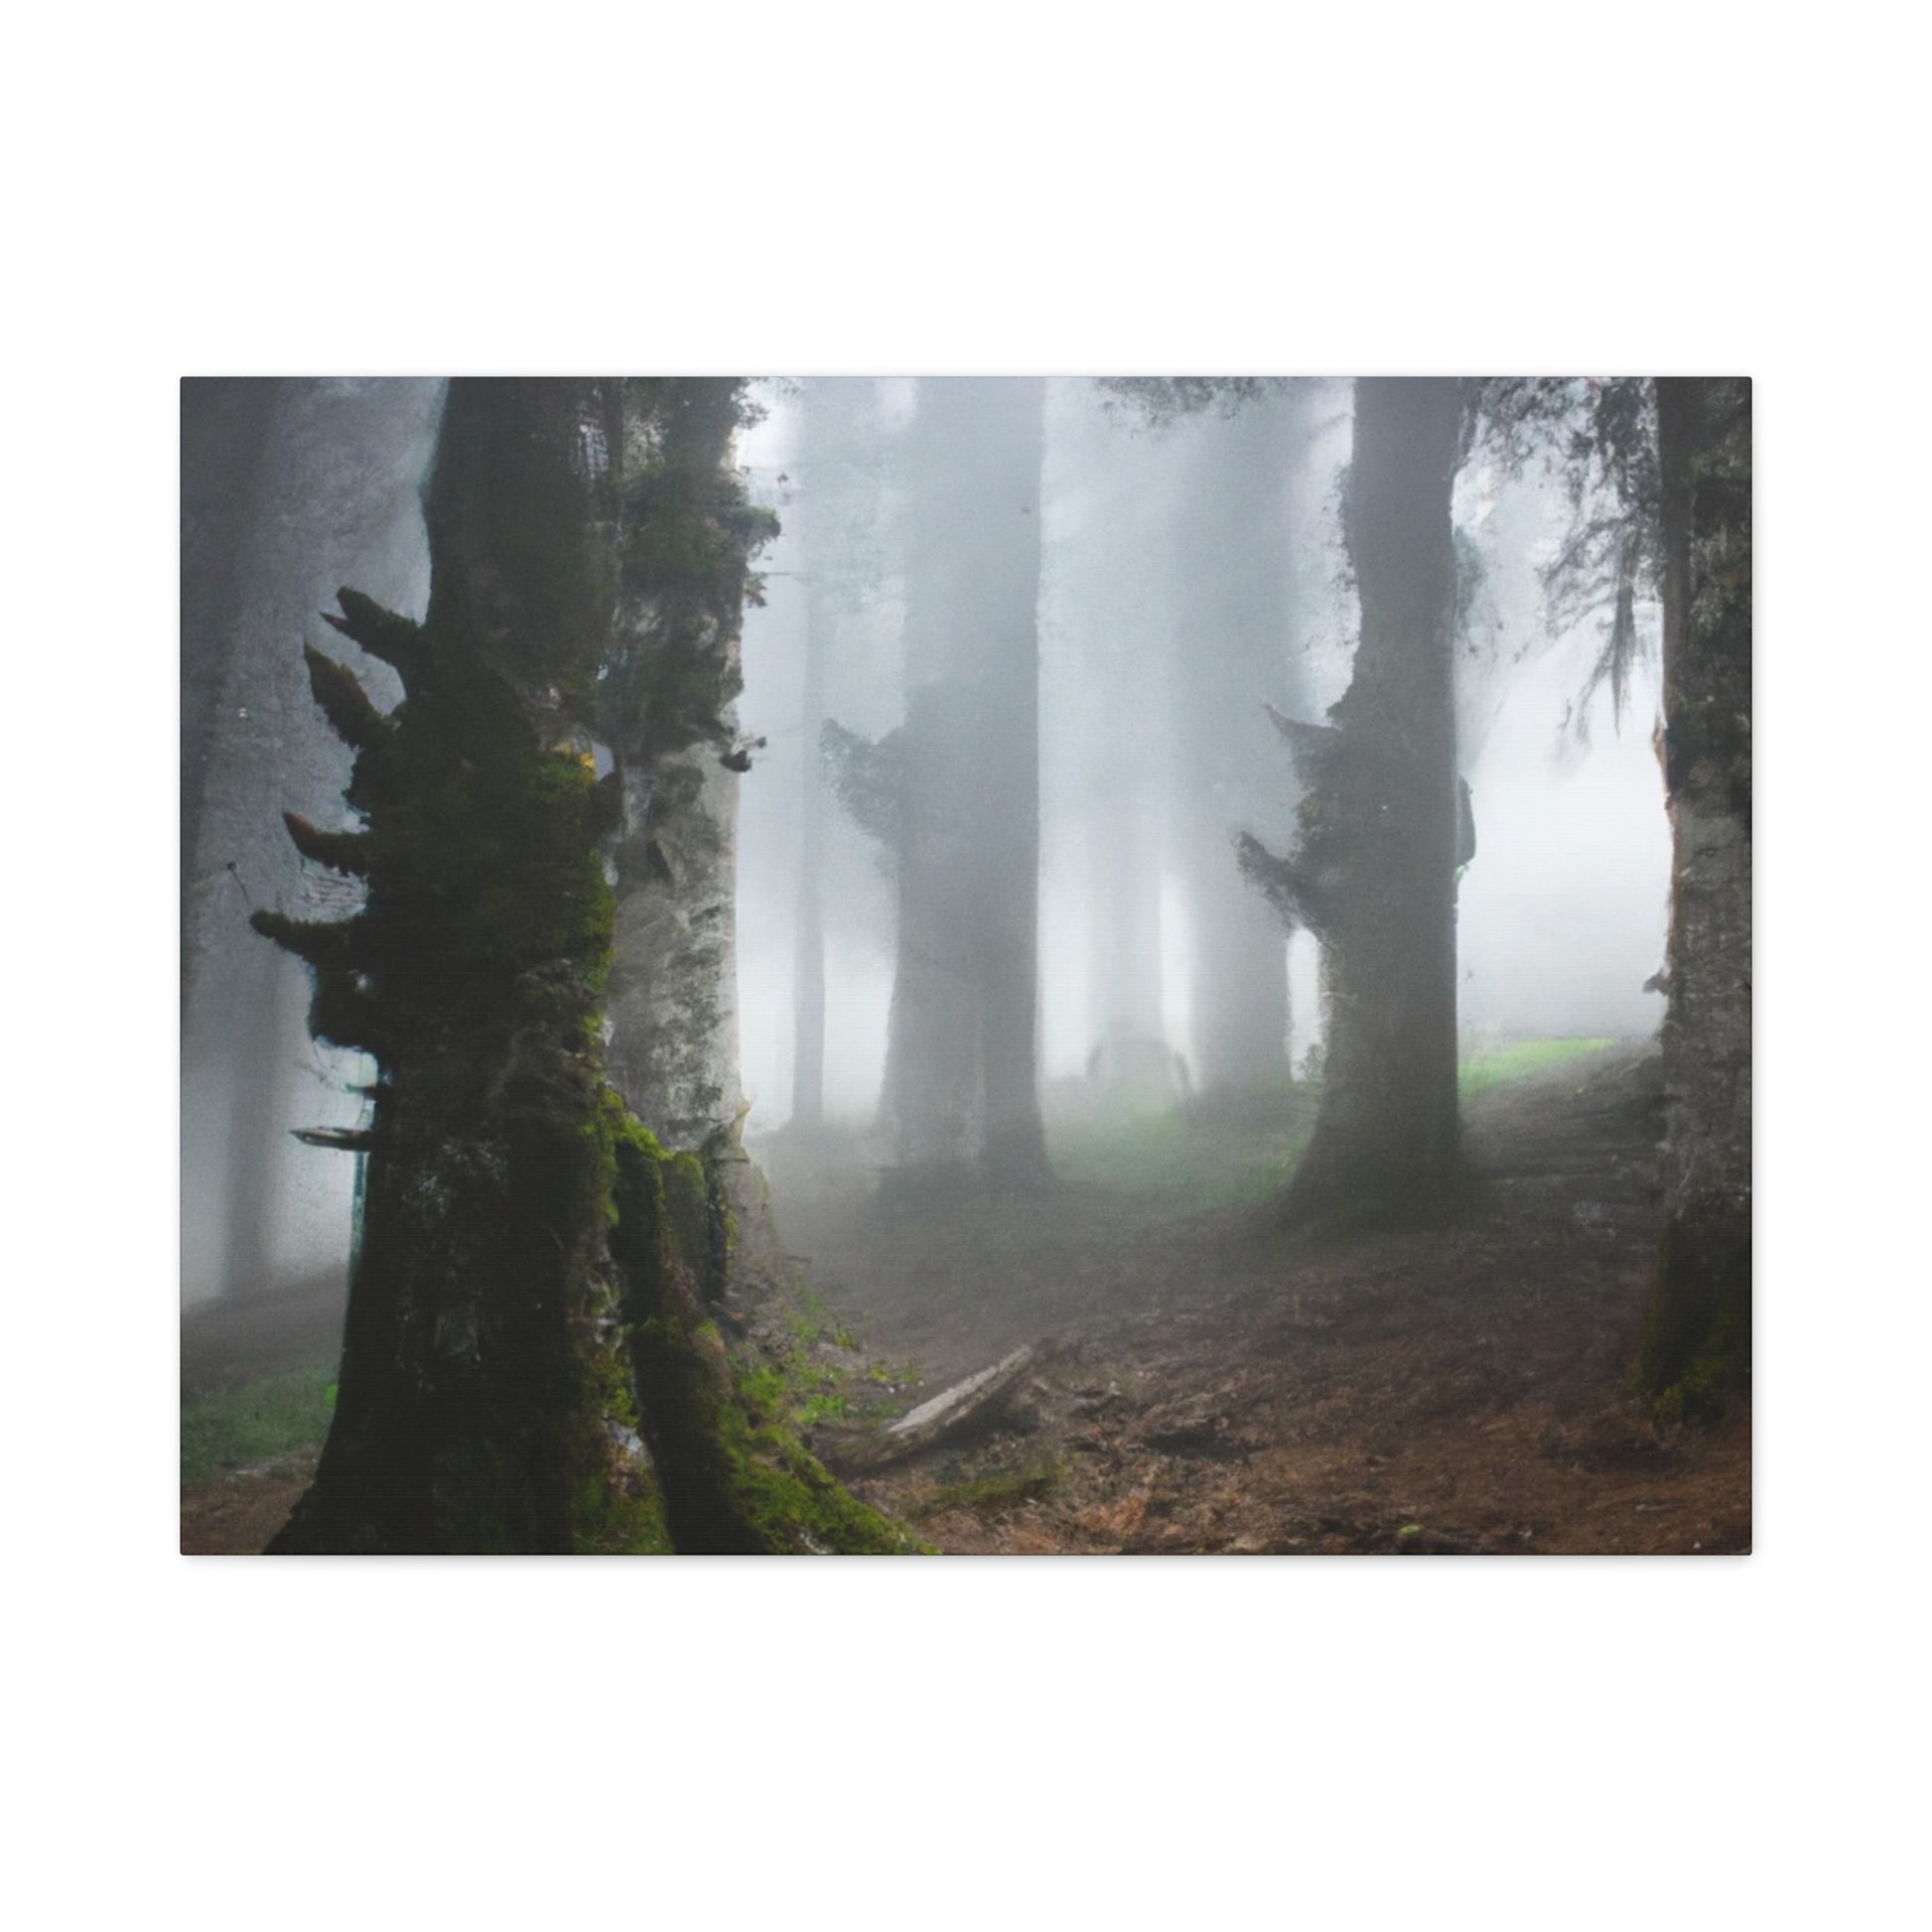 Quality canvas print of a serene, foggy forest with towering trees and lush moss, framed in ethically sourced radial pine. Multiple orientation options available, ideal for custom artwork or photos.